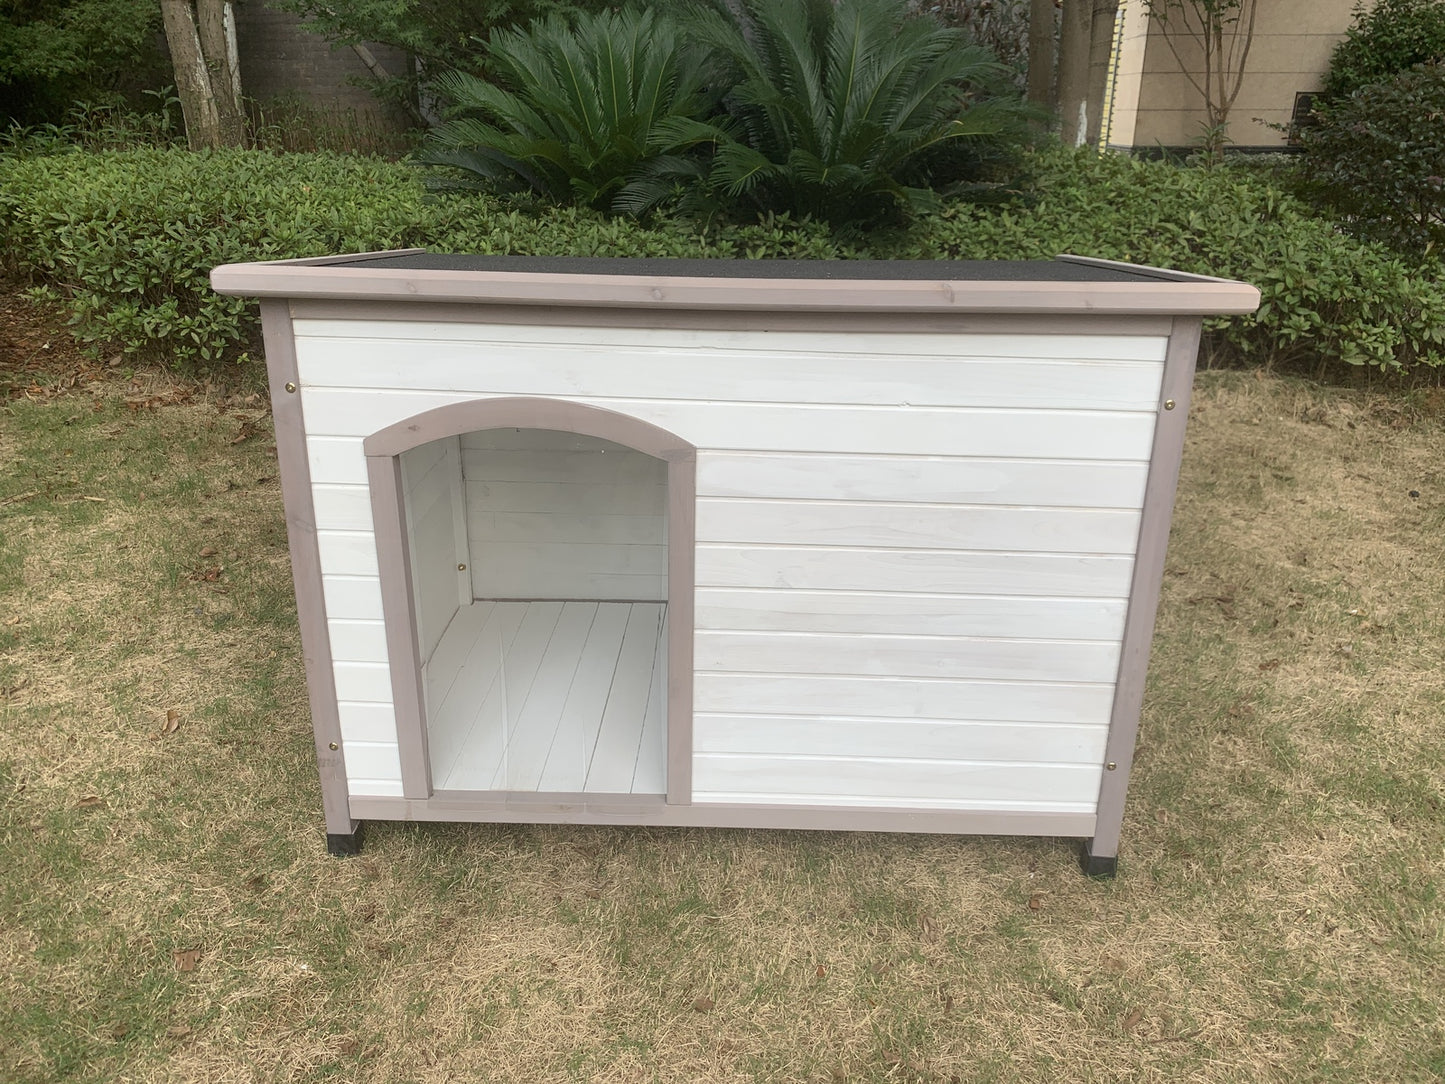 YES4PETS L Timber Pet Dog Kennel House Puppy Wooden Timber Cabin With Stripe White